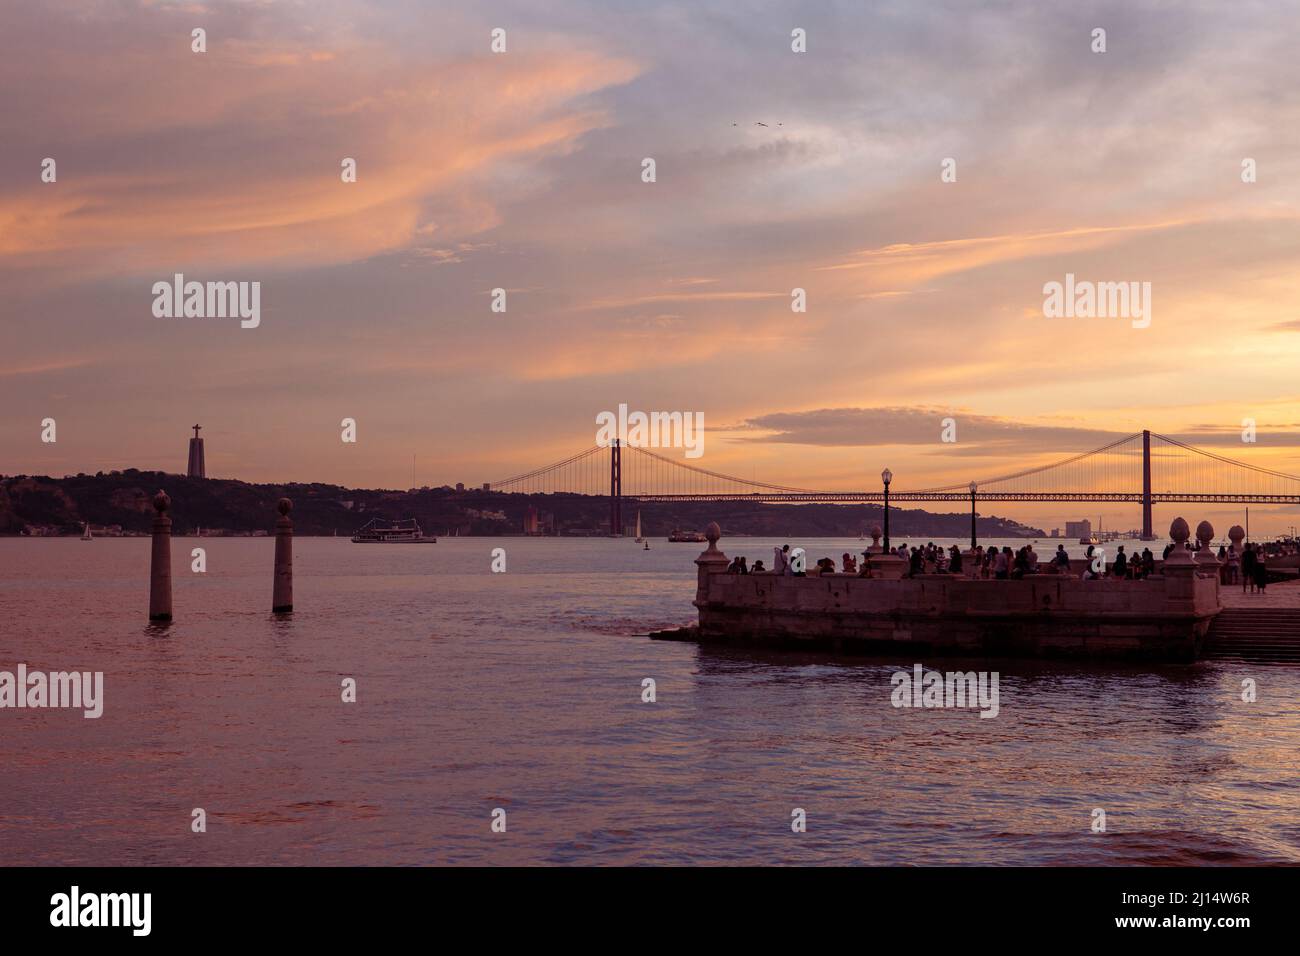 Tourists enjoying the sunset at Cais das Colunas pier, on the banks of the Tejo in Lisbon, with the Ponte de 25 Abril in the background, Portugal. Stock Photo